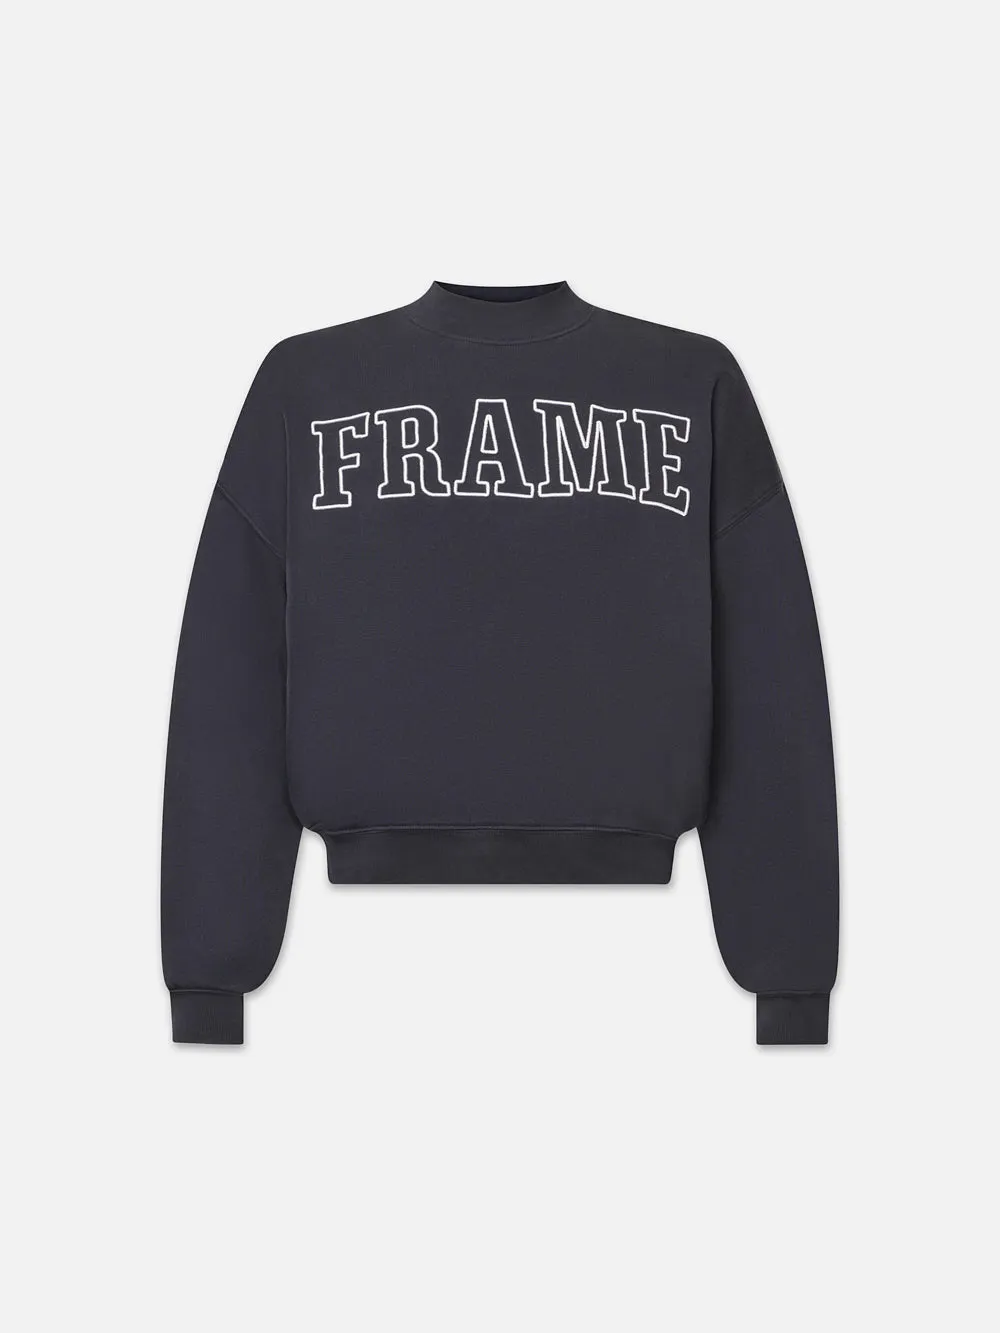 Five Things We Are Loving At Frame Block Letter Graphic Sweatshirt the best graphic sweatshirt splurgeworthy sweatshirt must have winter pieces what to wear this winter personal stylists share favorite winter pieces must have things for your winter closet